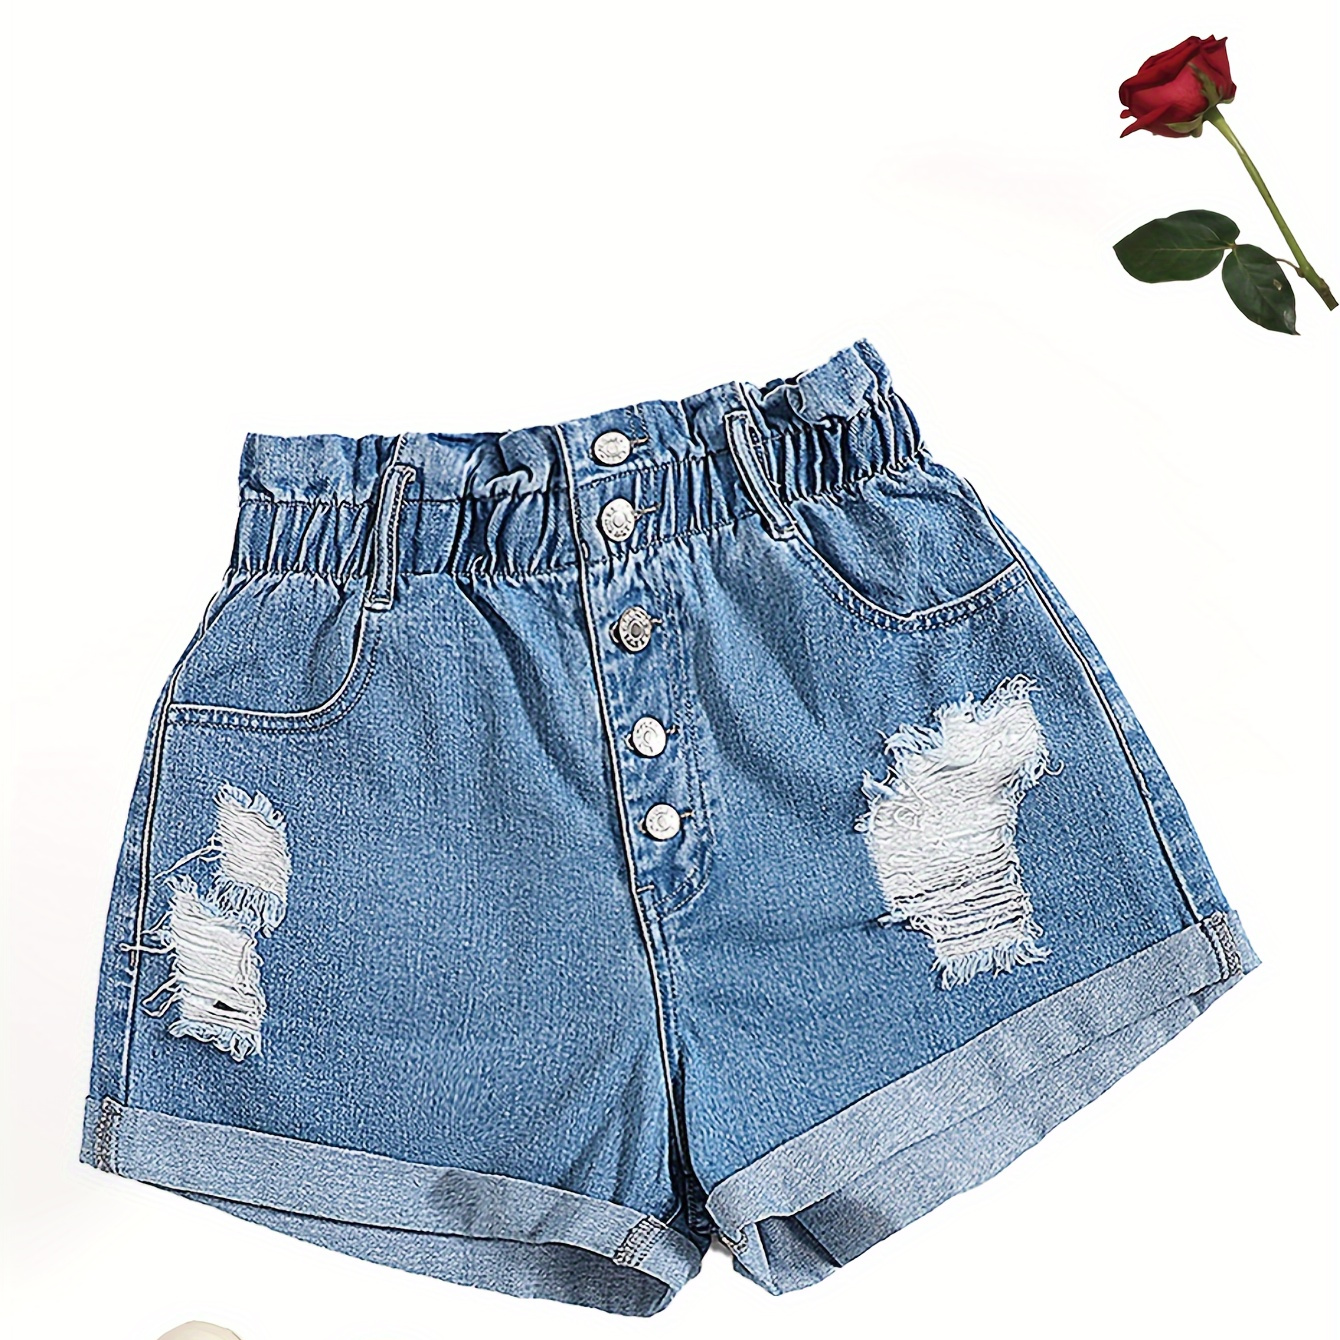 

Women's Classic Fashion Elastic Waist Single-breastes Denim Shorts, Street Style, Ripped Detail, Button Front, Casual Summer Wear